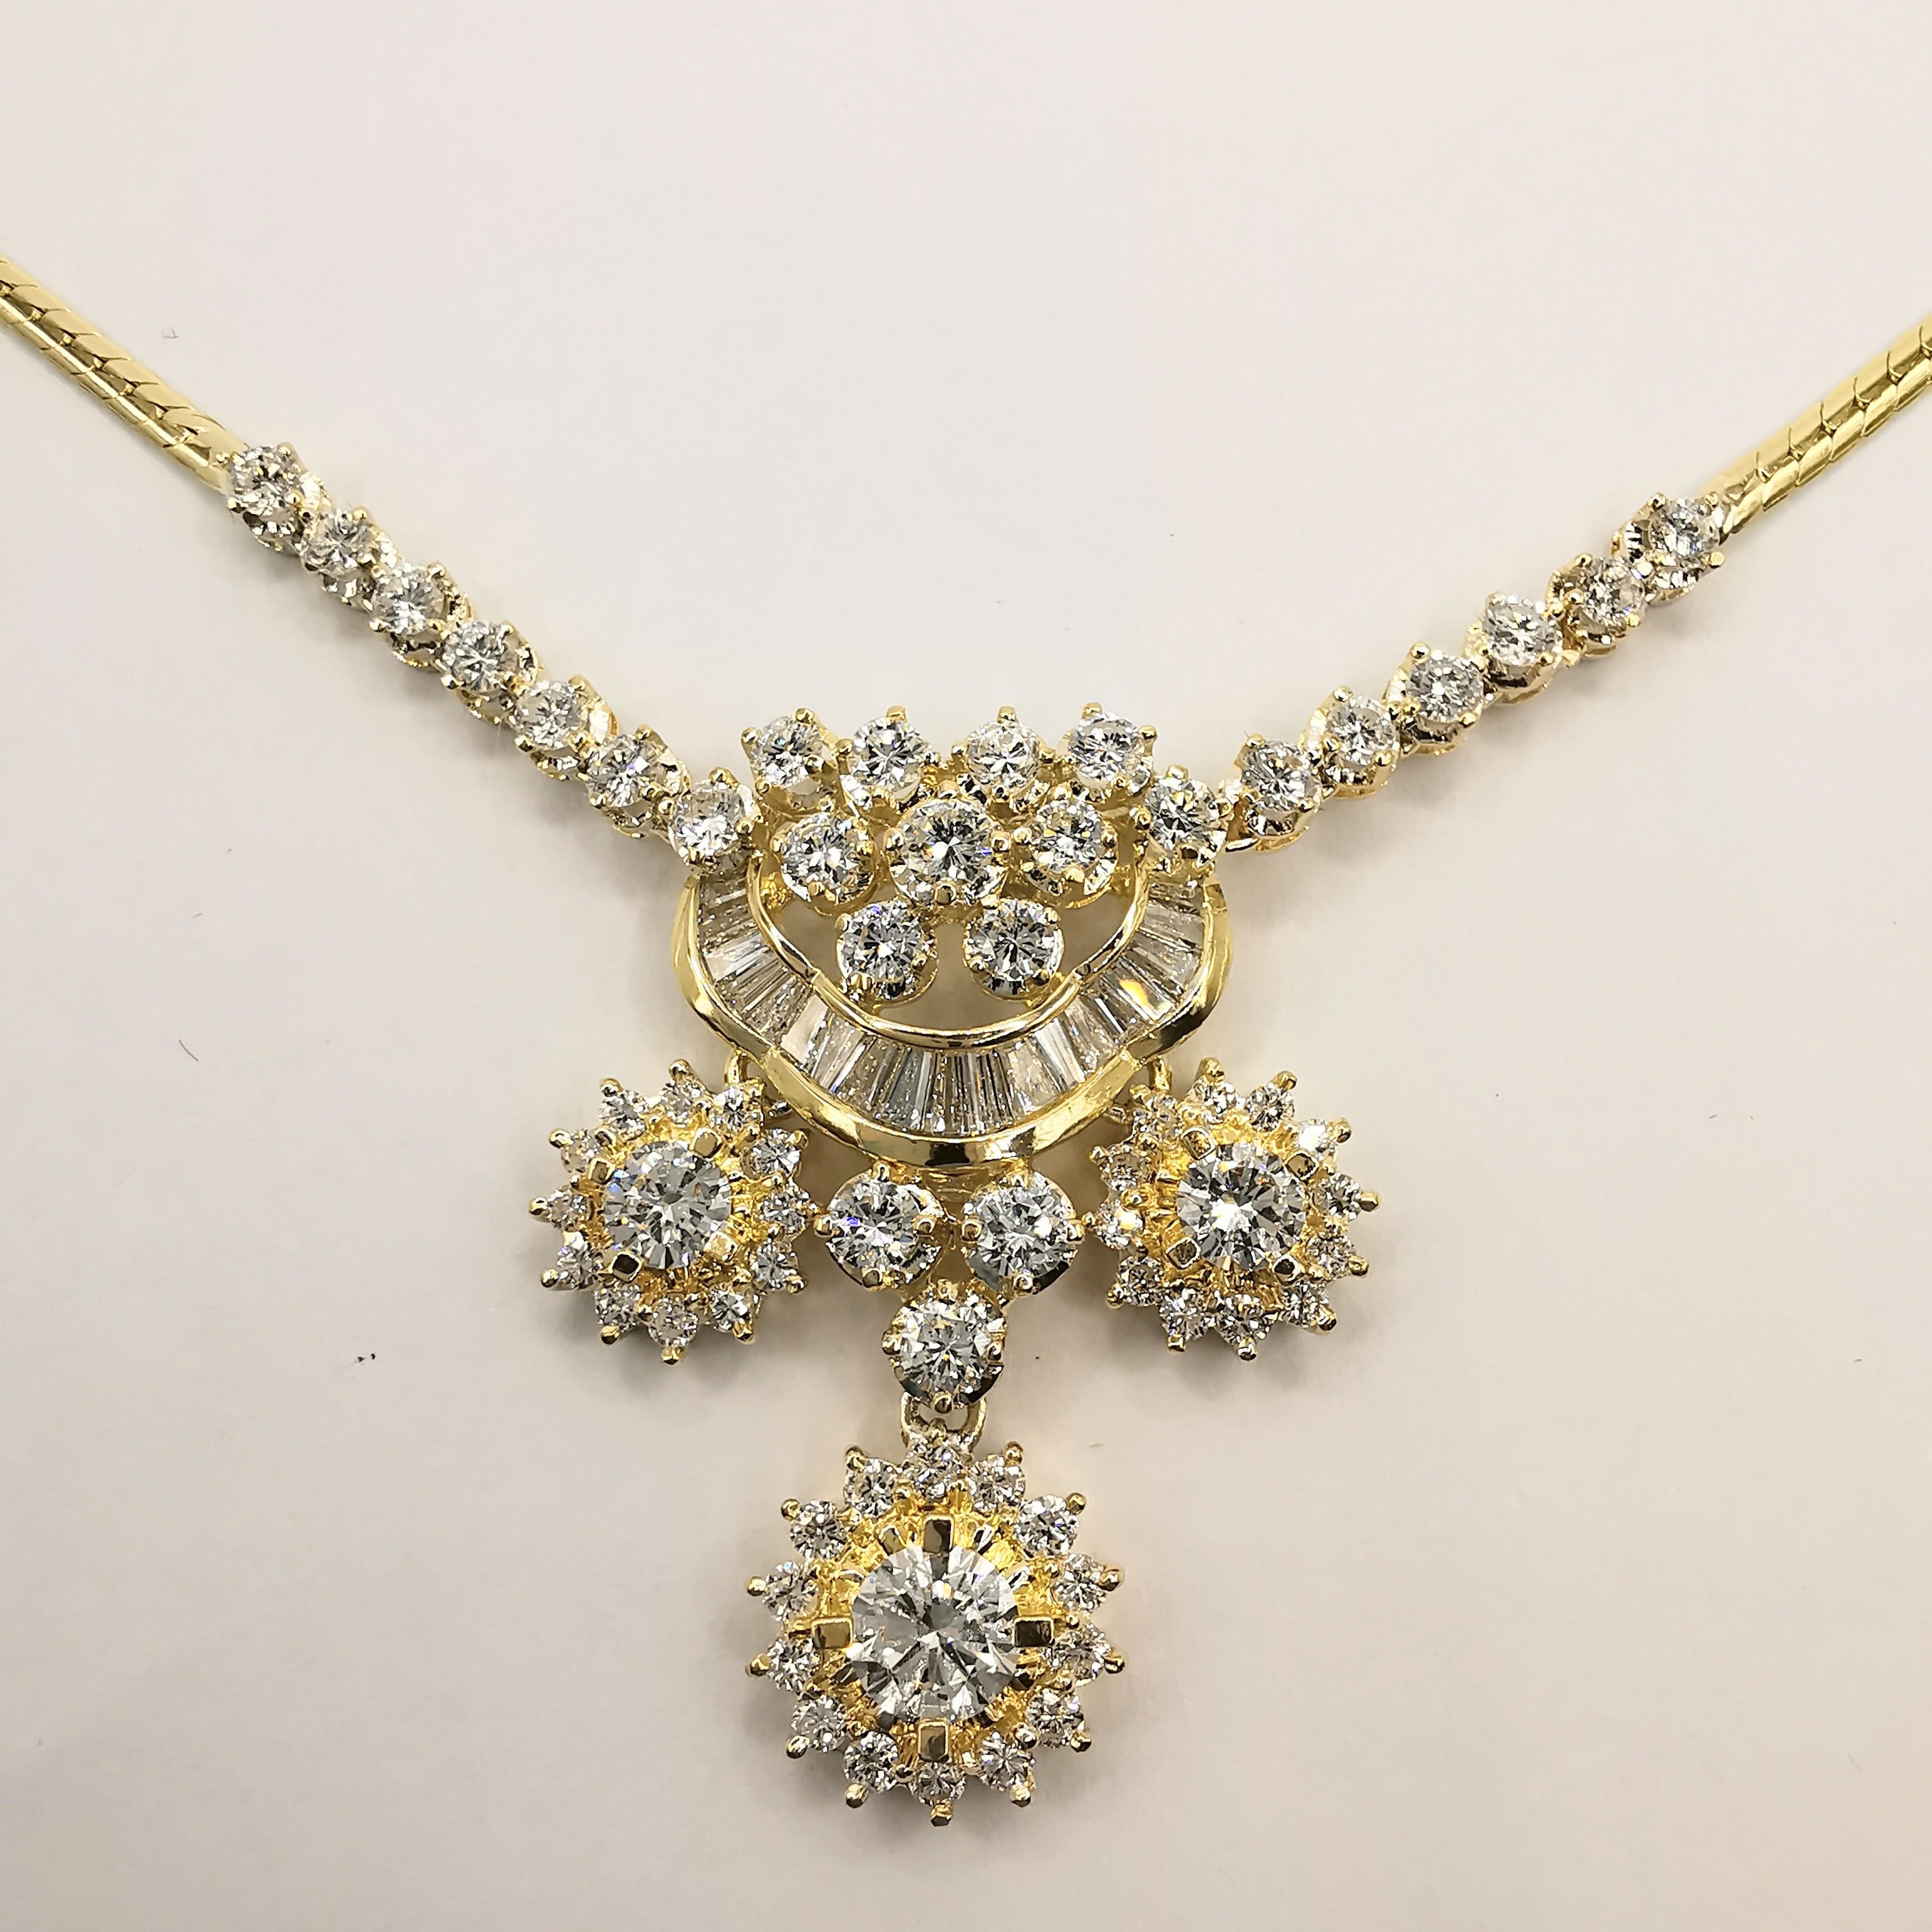 This vintage diamond necklace is a true work of art. The centerpiece of the necklace features three stunning diamonds: one round-cut diamond weighing approximately 0.376 carats, and two round-cut diamonds weighing approximately 0.34 carats each.